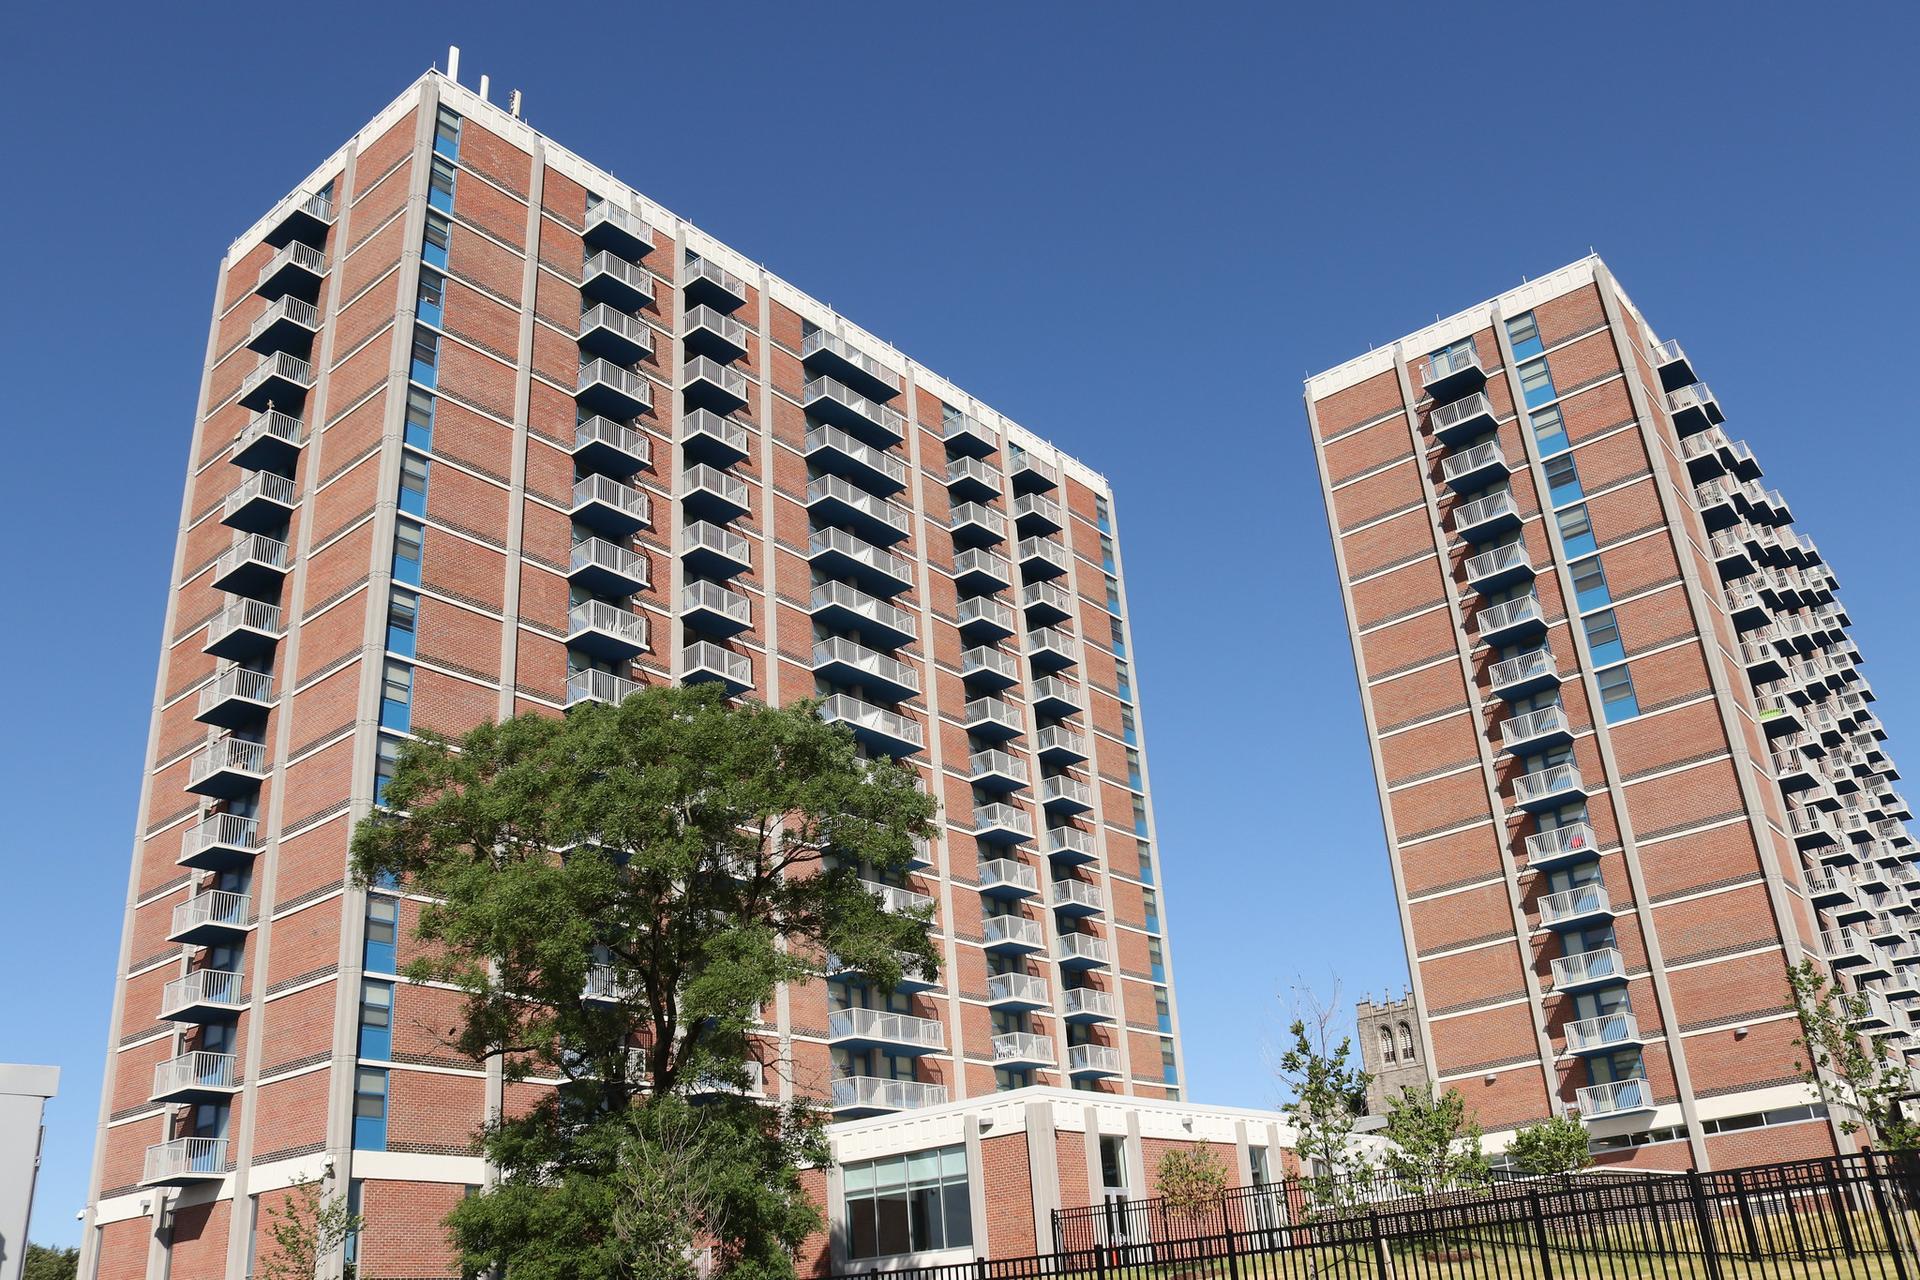 City view at McCulloh apartments at Druid Hill Avenue in Baltimore, Maryland, June 2019. 